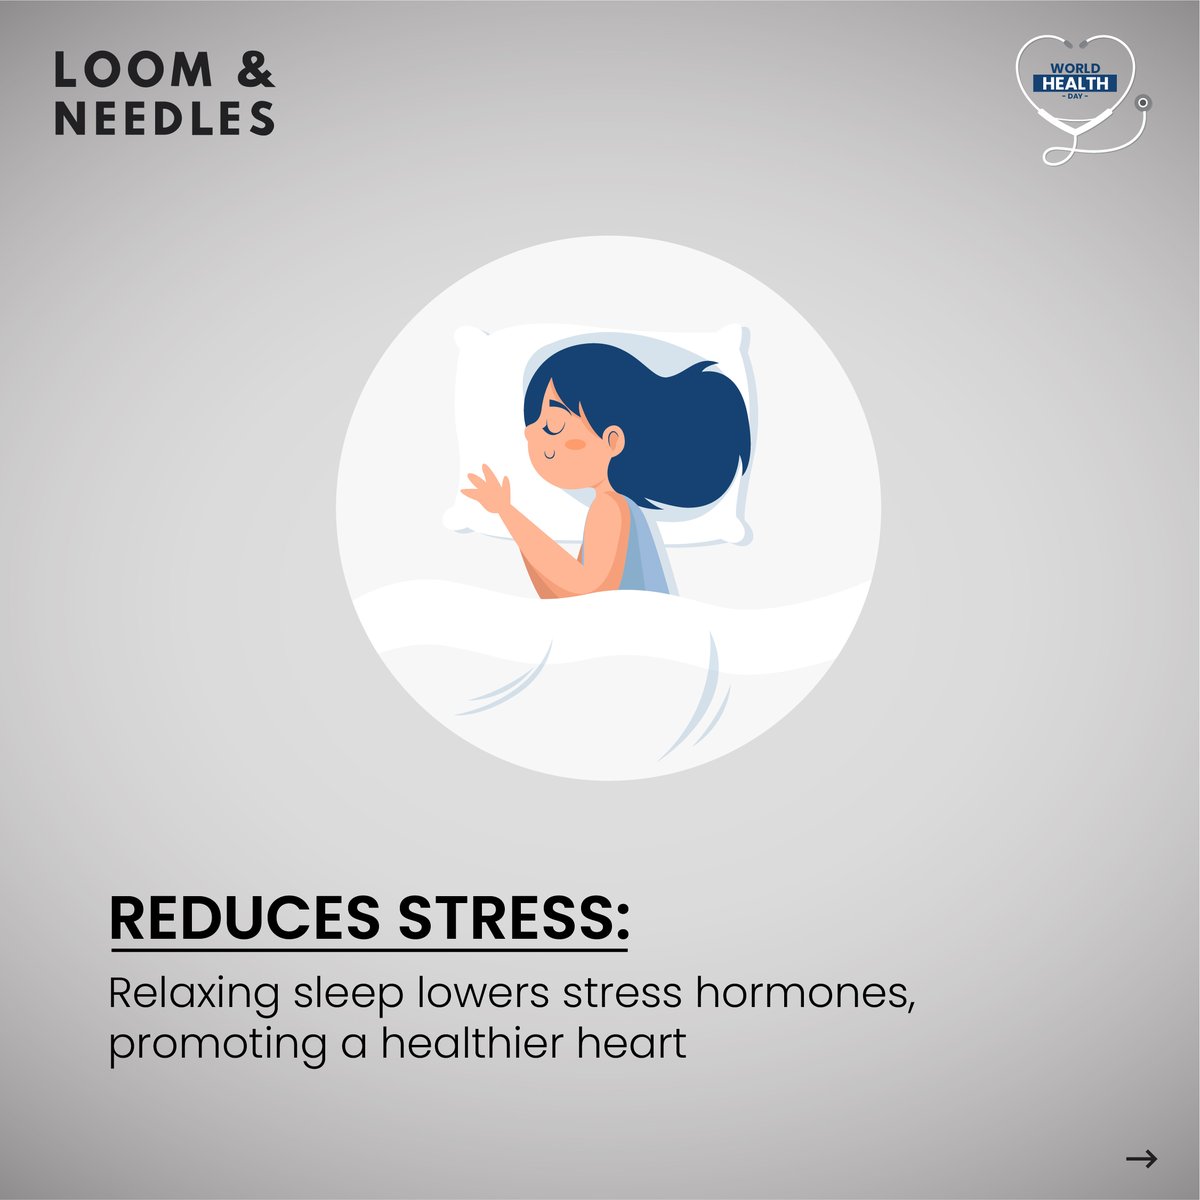 This #WorldHealthDay take a pledge to prioritize your wellbeing: Get the rest you need with L&N! 

#LoomandNeedles #heartday #hearthealth #livehealthy #SleepBetterFeelBetter #SleepSolutions #sleepy